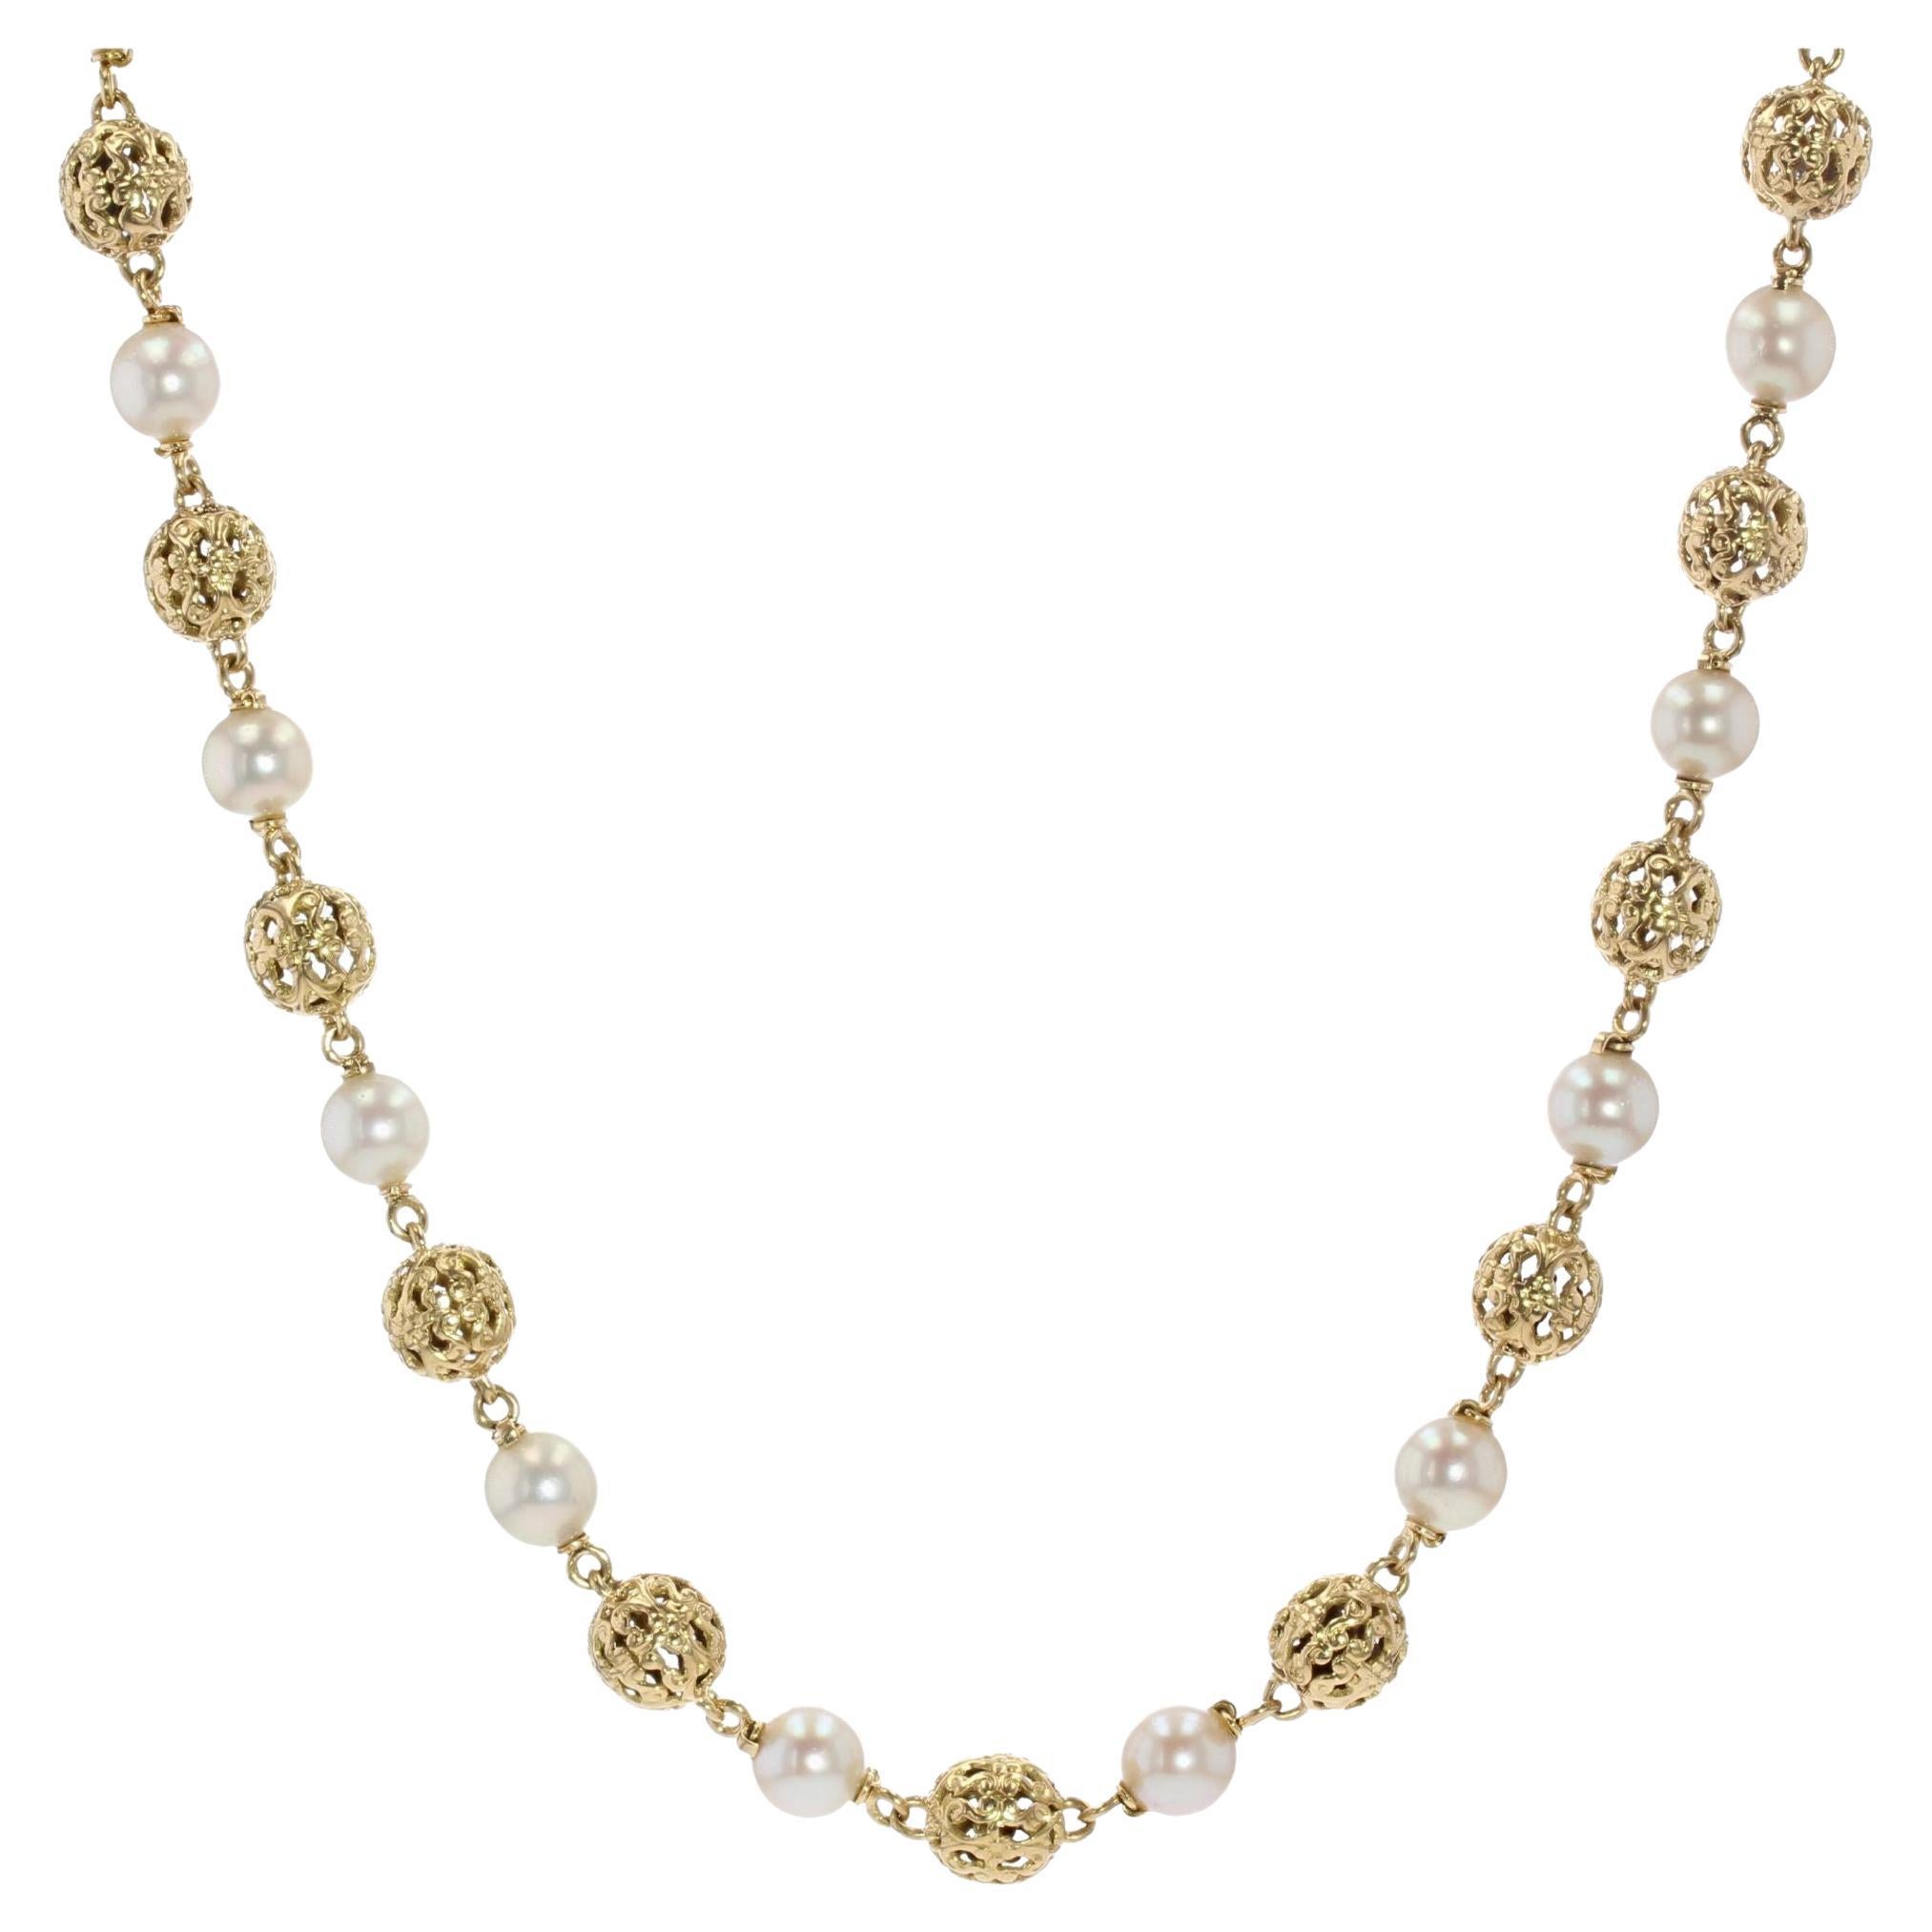 French 1960s 18 Karat Yellow Gold Cultured Pearls Convertible Necklace